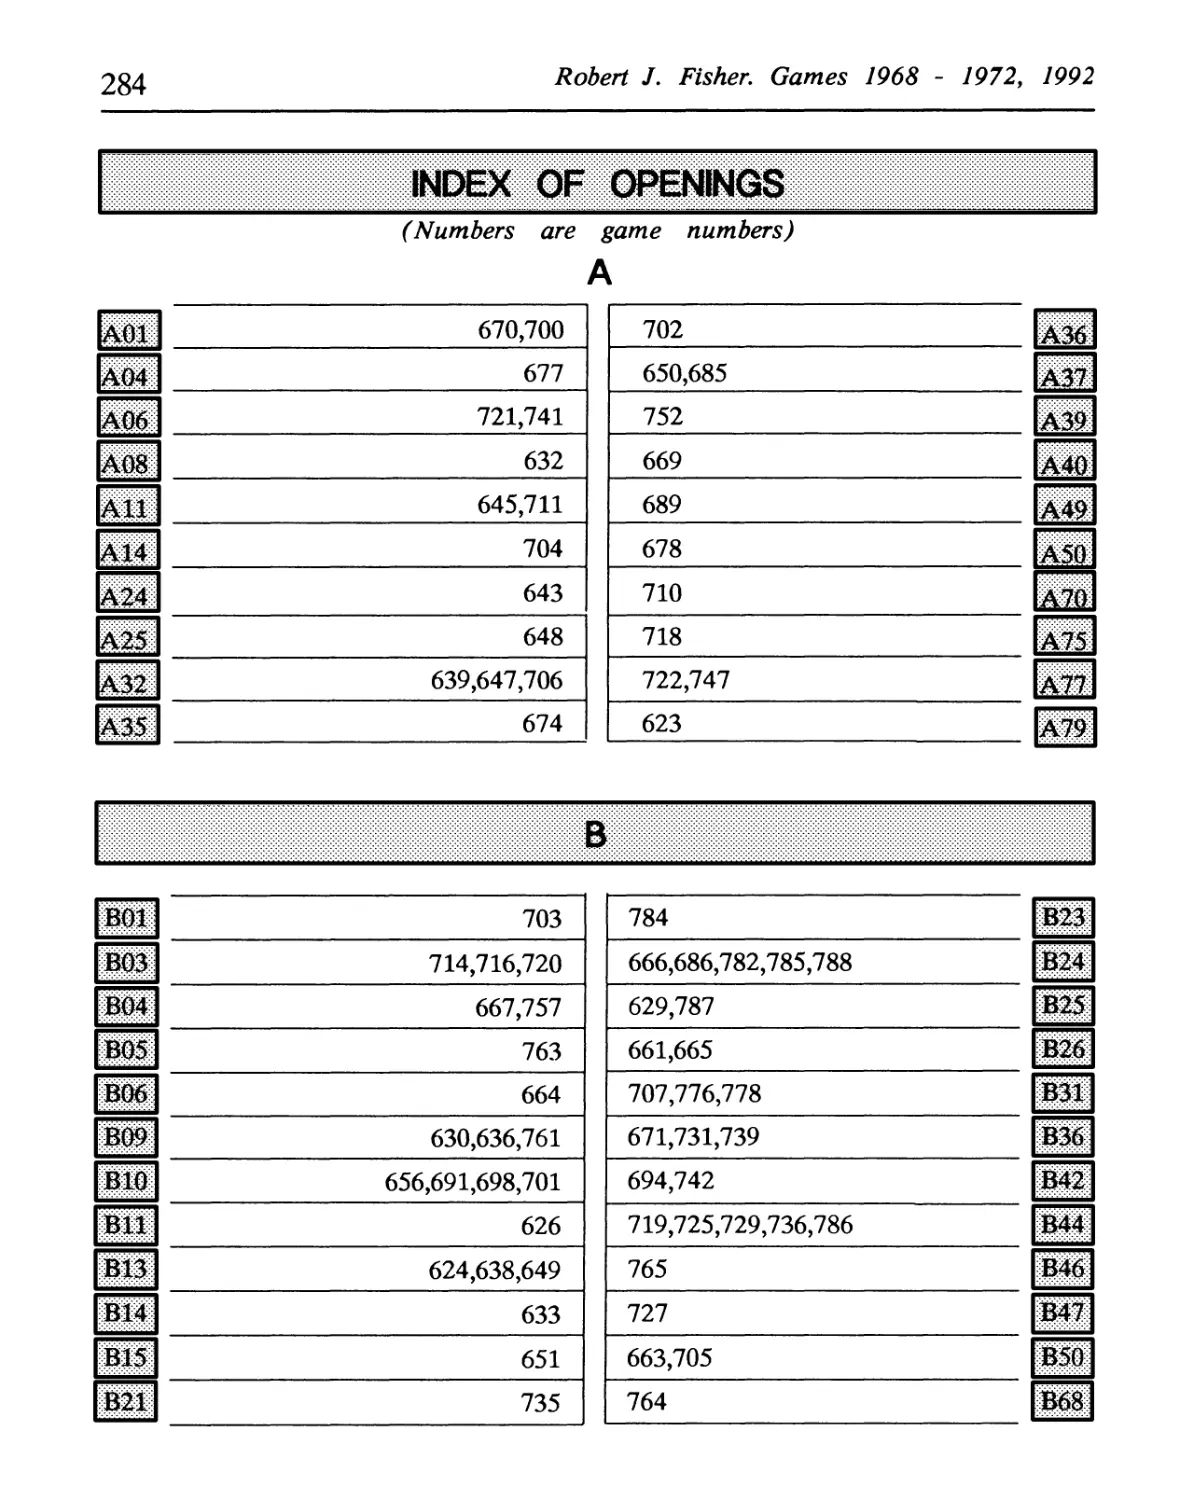 Index of Openings